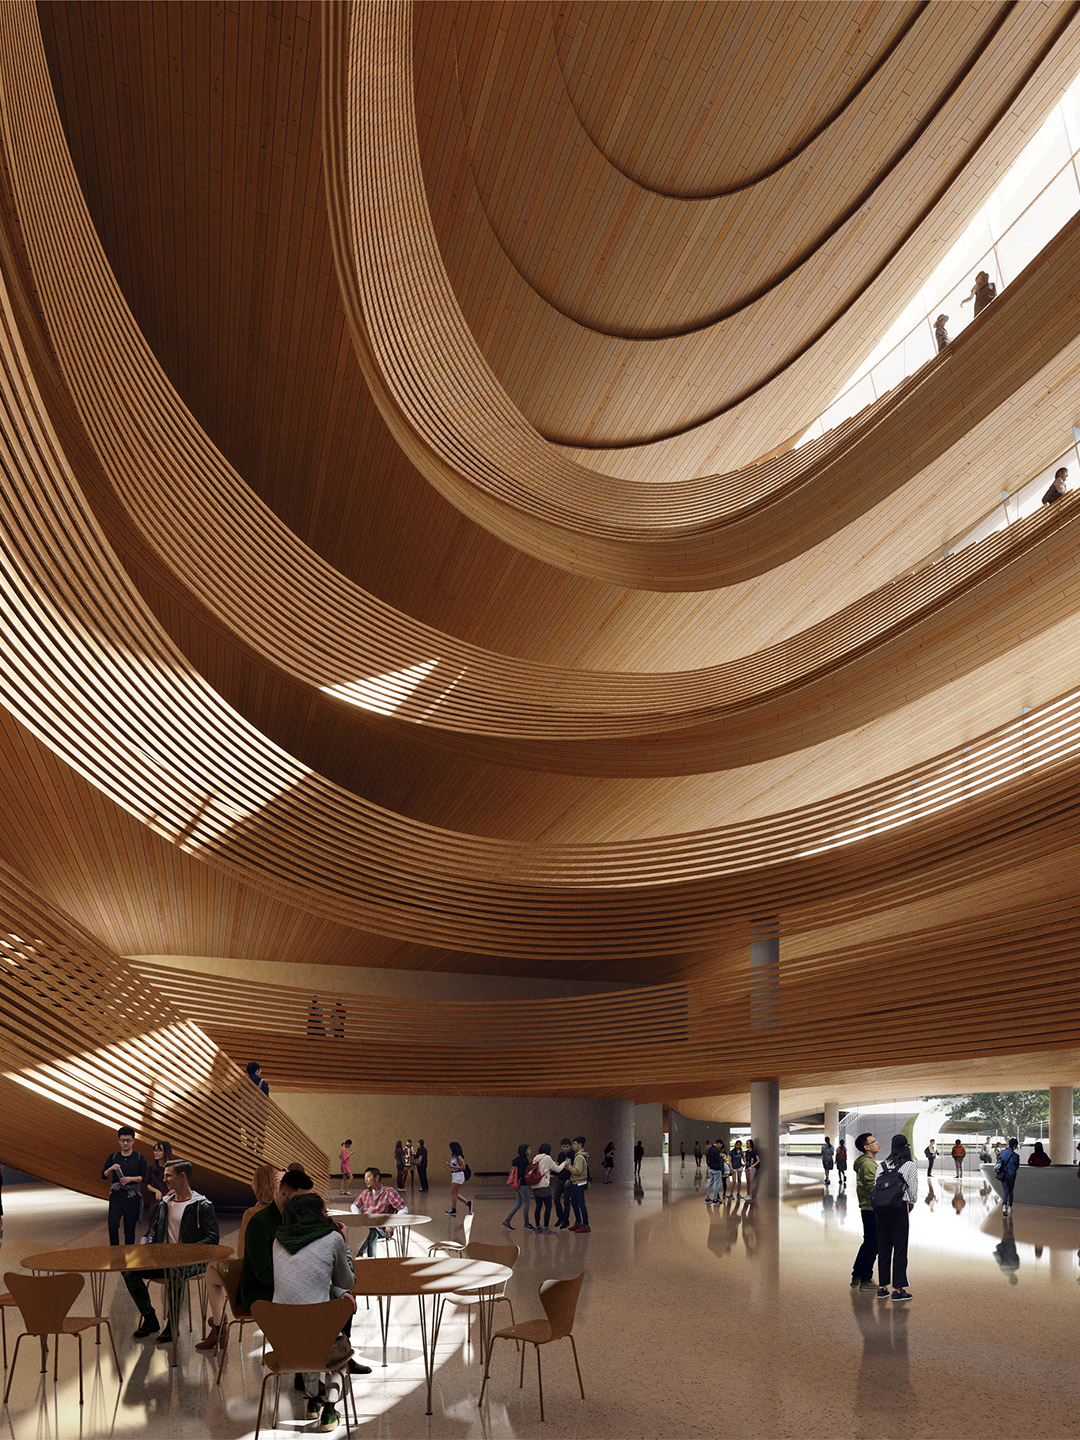 Jiaxing Civic Centre in China by MAD Architects